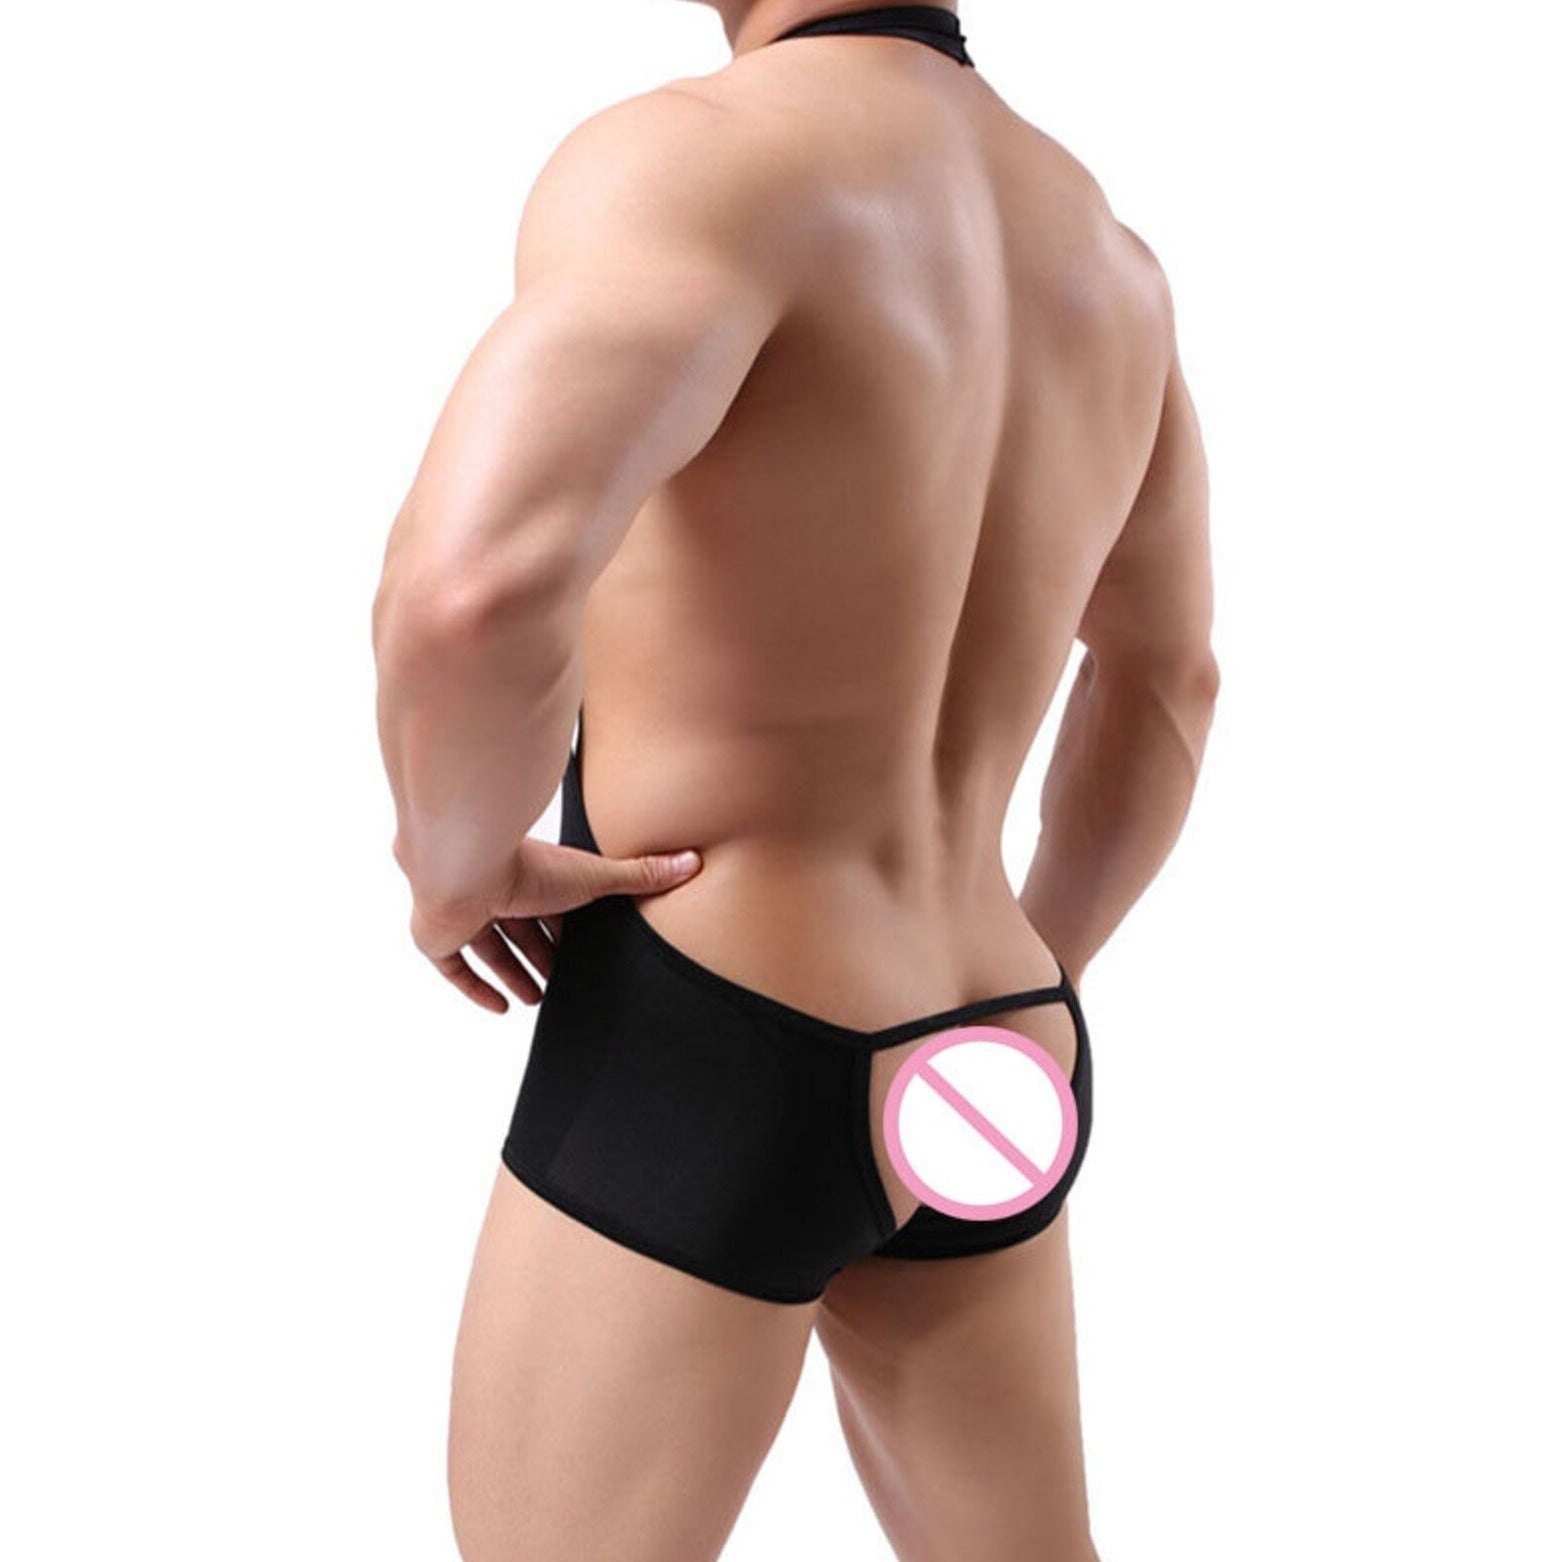 sexy gay man in black white Gay Singlet | Men's Kinky Backless Bulge Pouch Singlets - Men's Singlets, Bodysuits, Rompers & Jumpsuits - pridevoyageshop.com